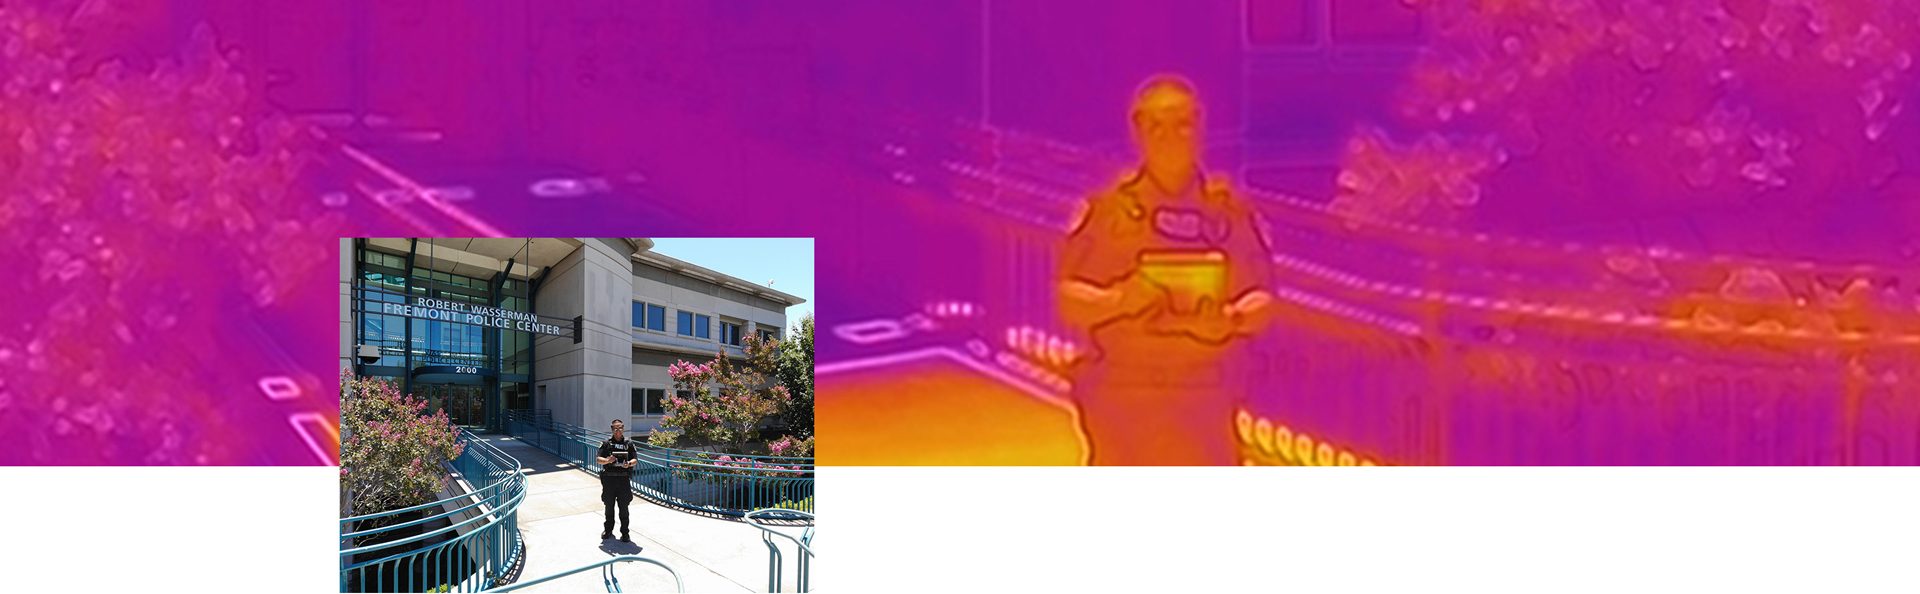 Fremont Police Department thermal imaging camera